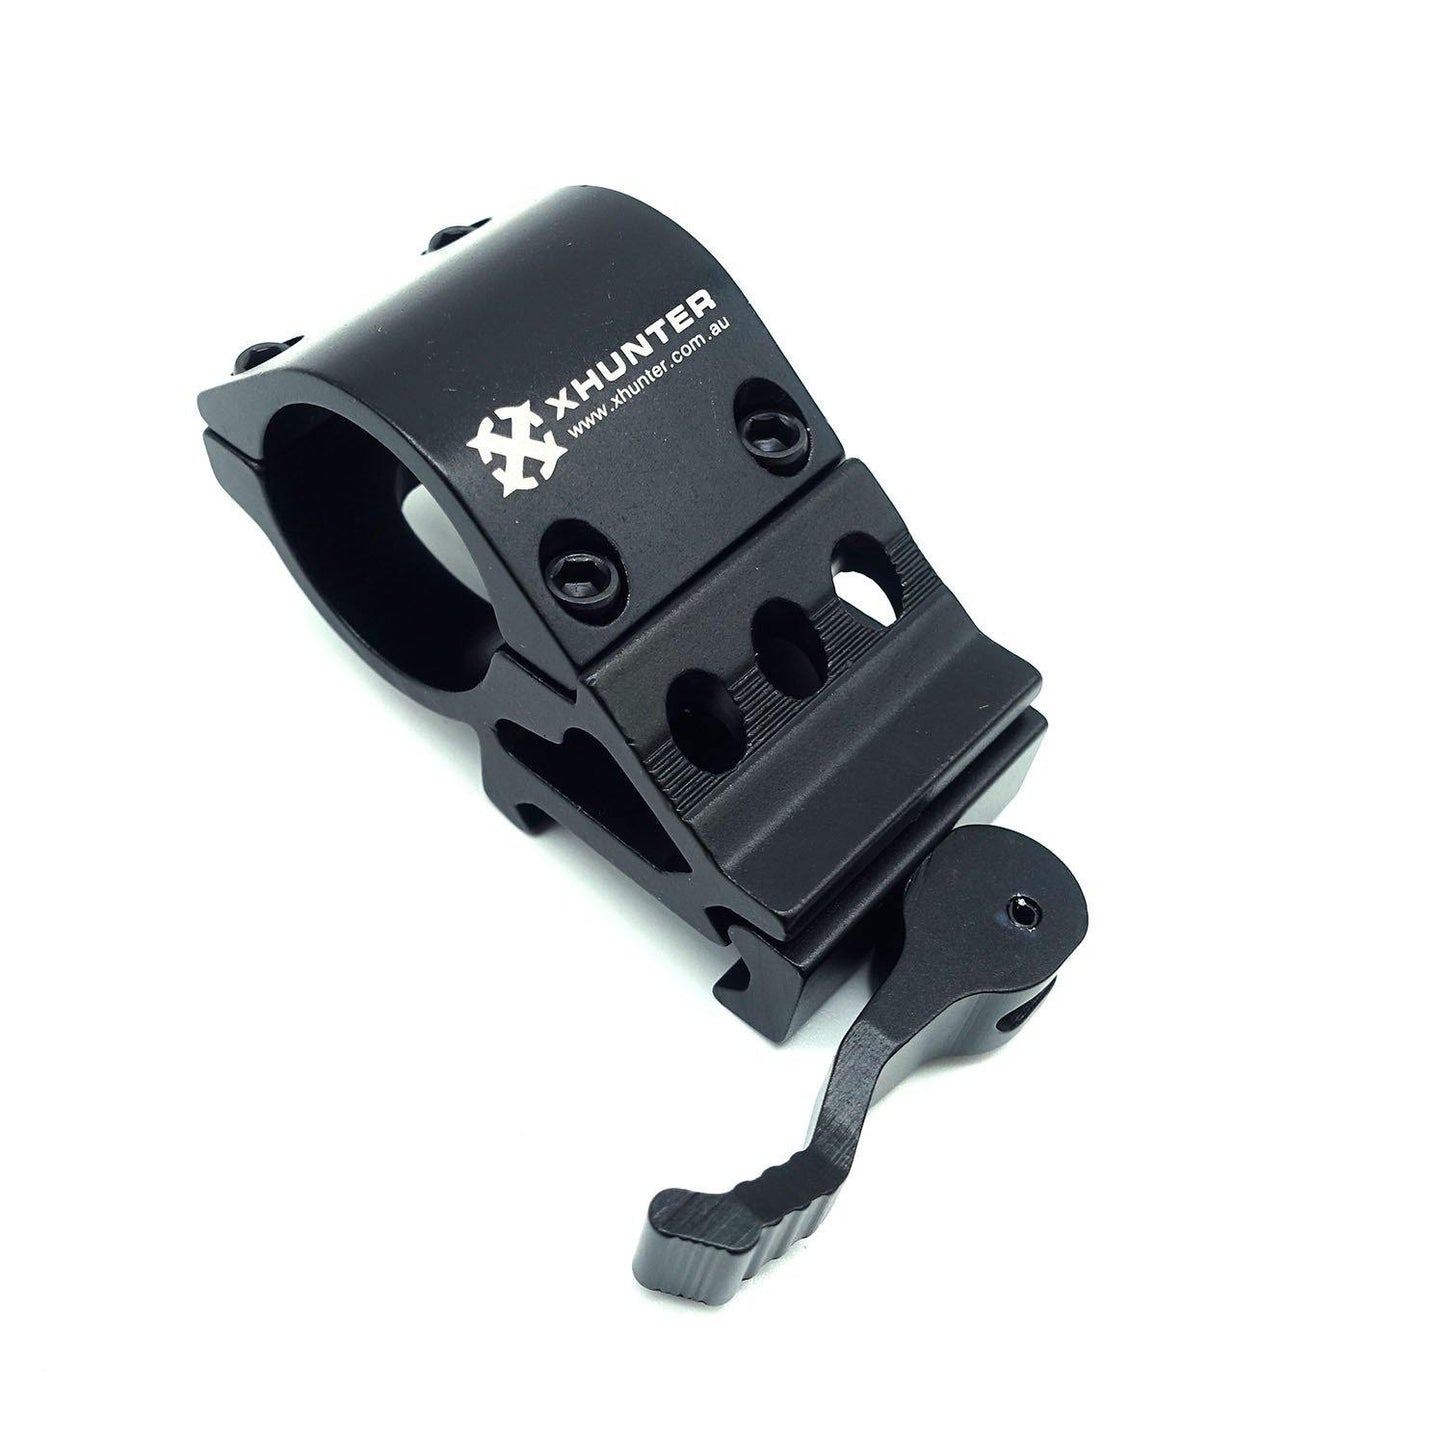 Xhunter Quick Release Flashlight Offset Tactical Weapon Mount - 1 Inch Picatinny #t2008 - Xhunter New Zealand